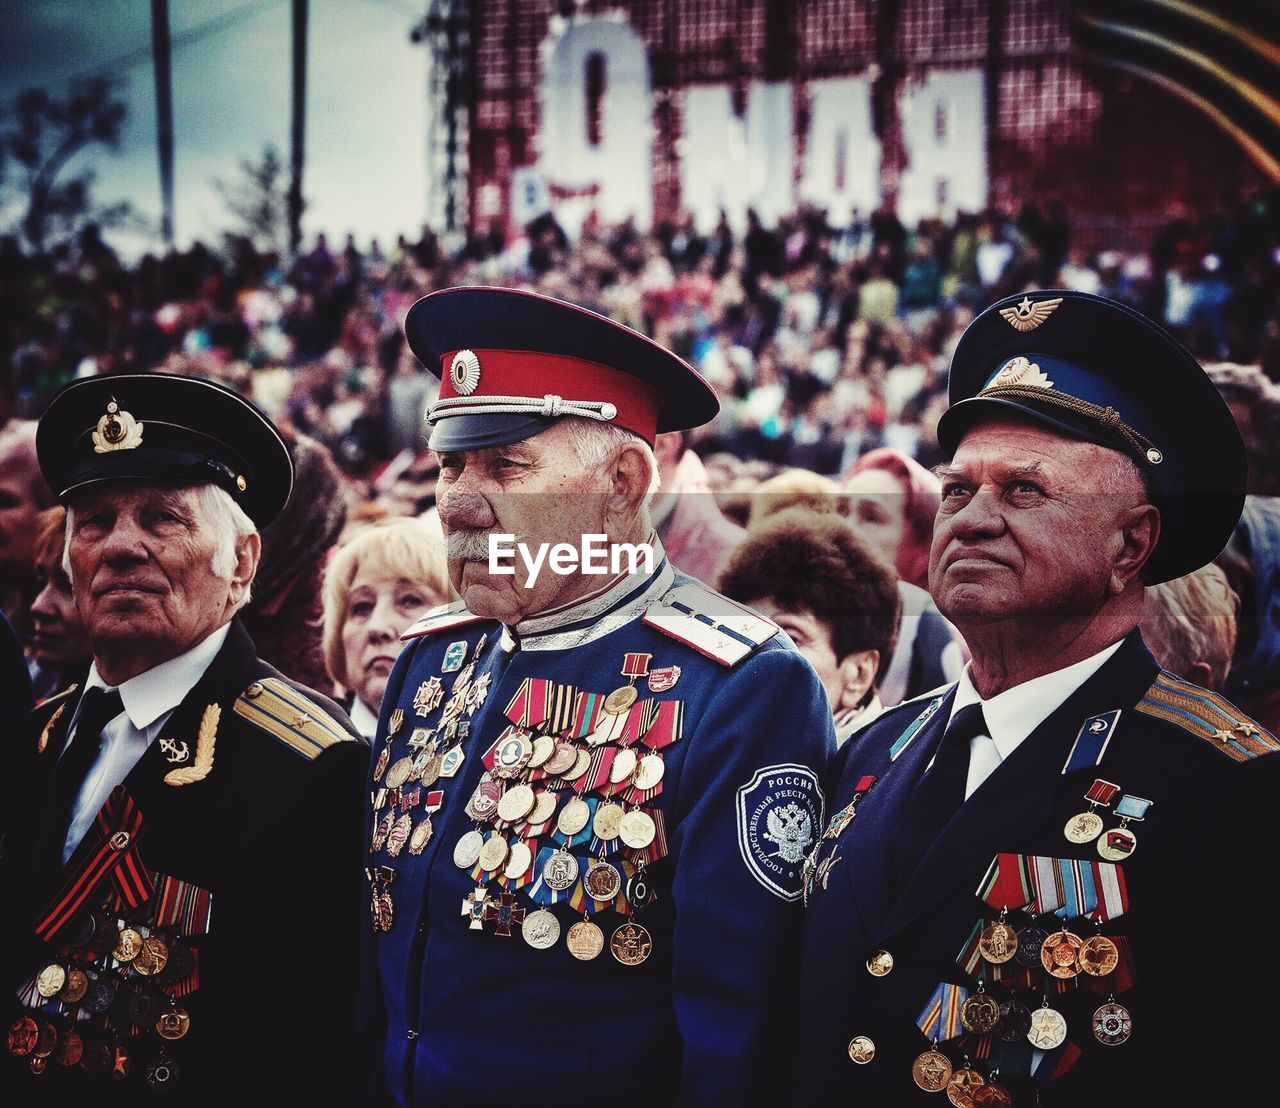 group of people, men, adult, clothing, person, emotion, crowd, celebration, mature adult, arts culture and entertainment, event, happiness, togetherness, government, uniform, hat